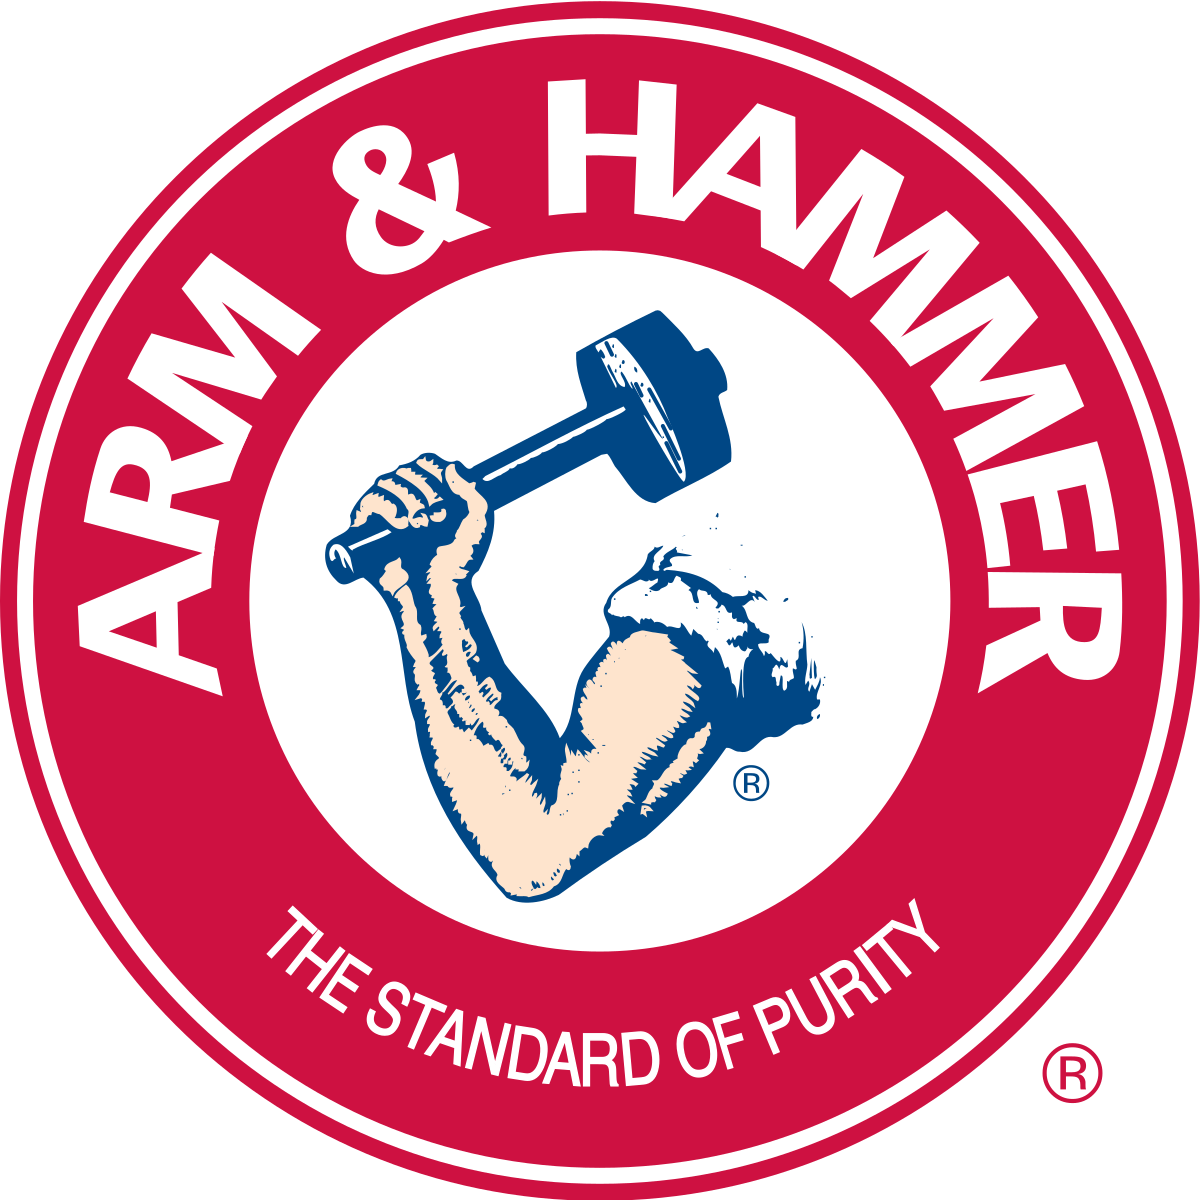 ARM AND HAMMER